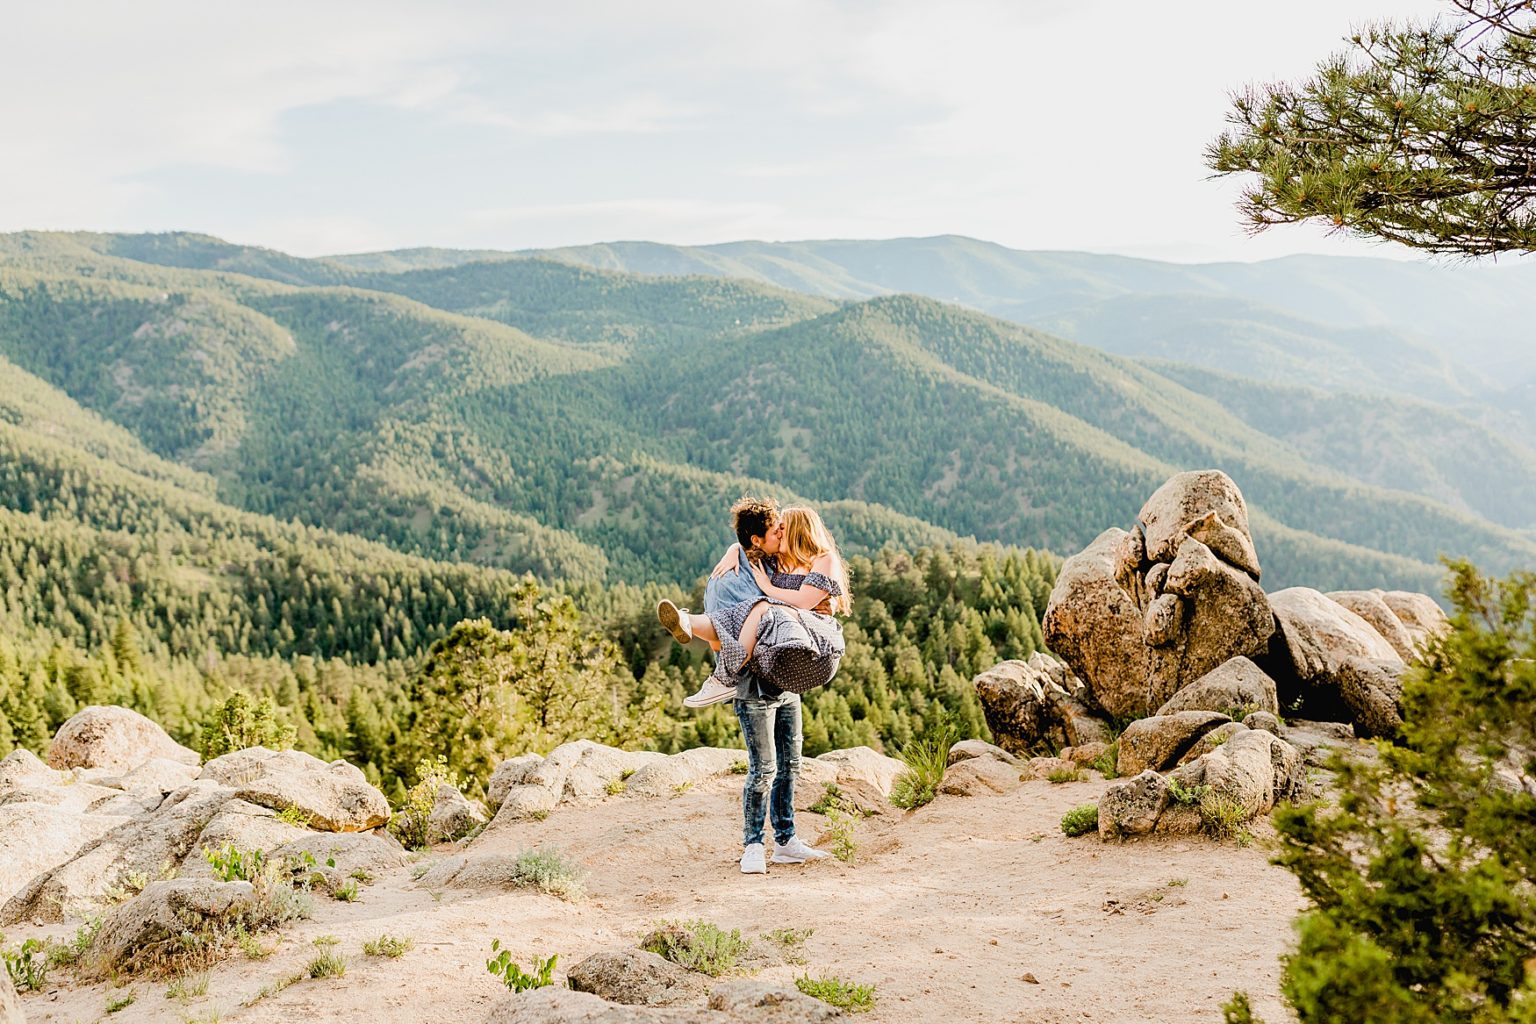 man lifts woman up and holds her in the stunning colorado mountain scenery